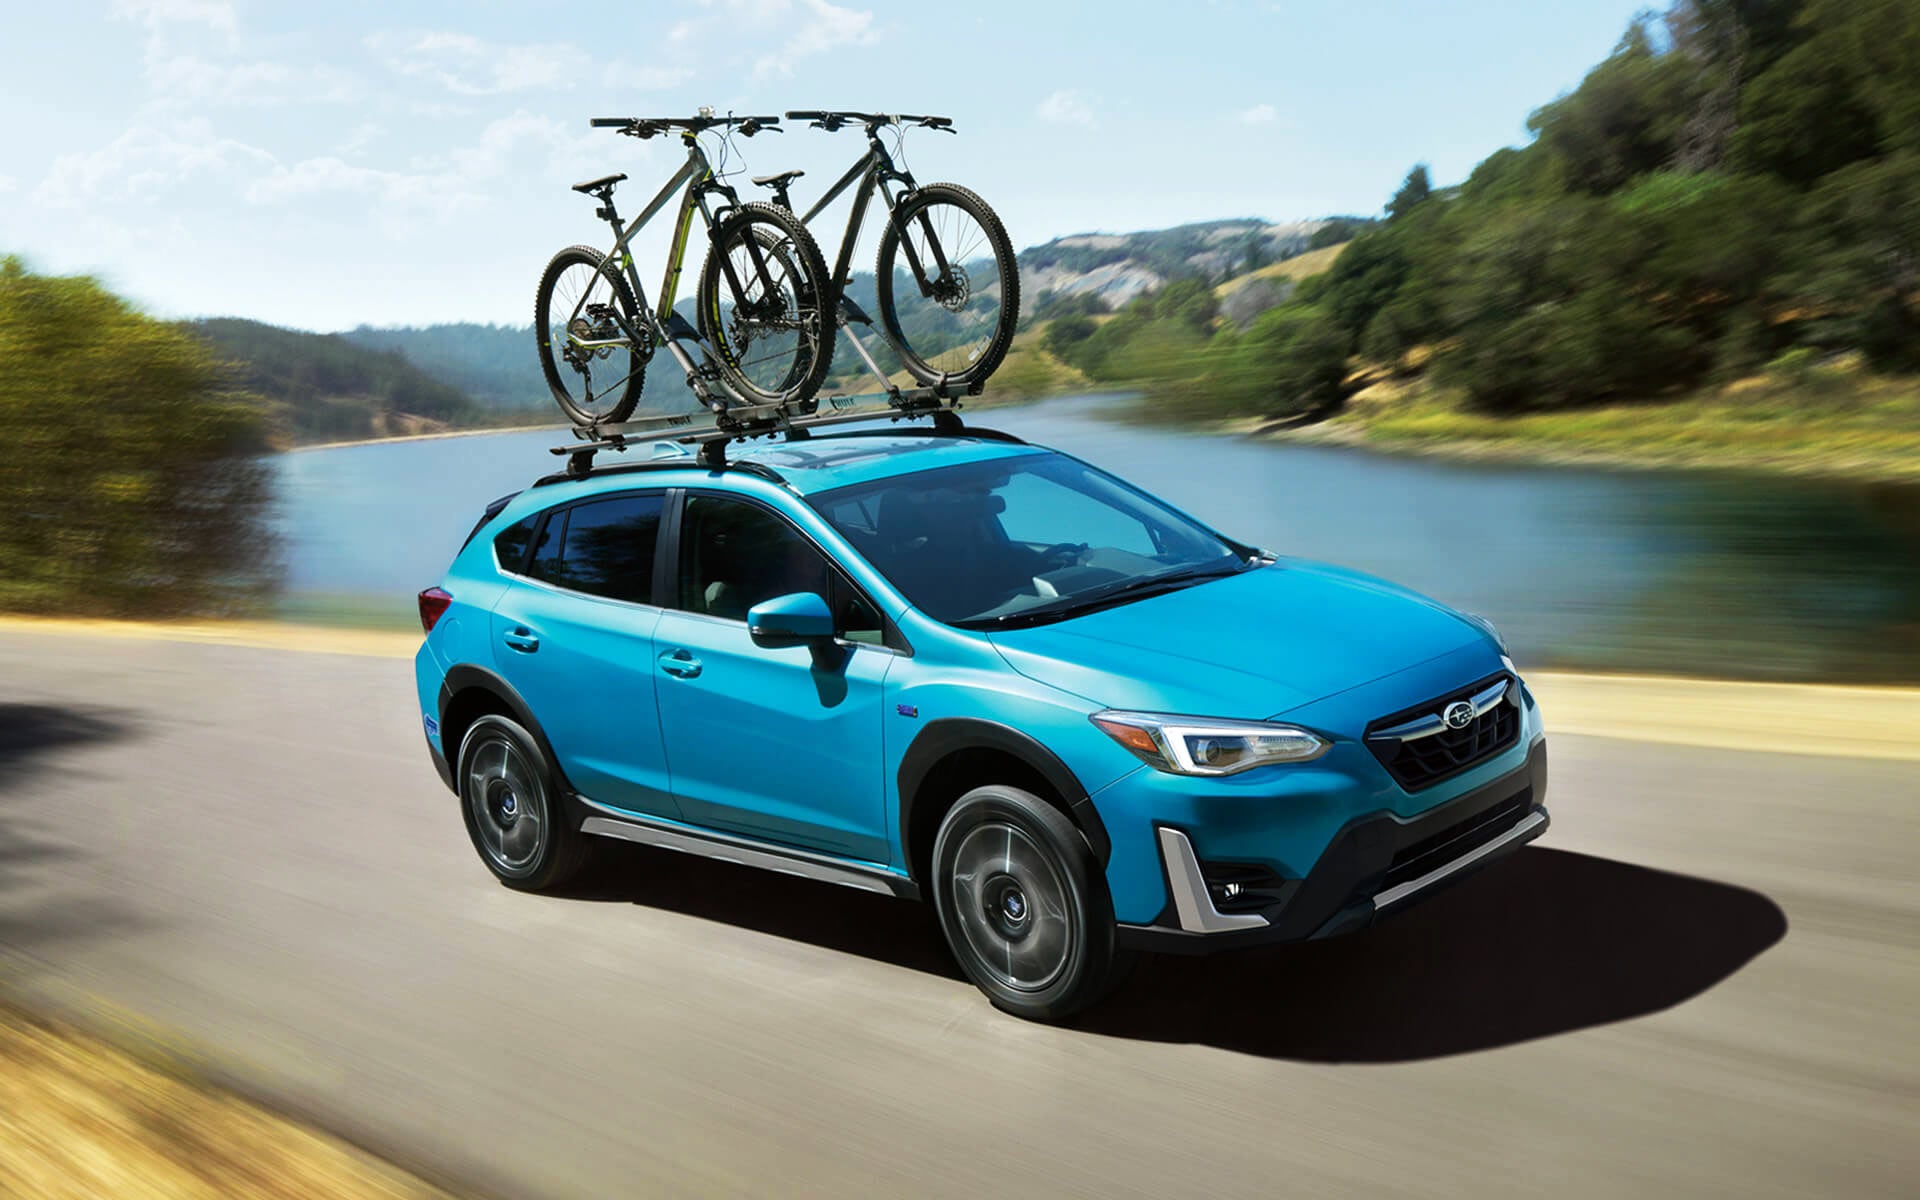 A blue Crosstrek Hybrid with two bicycles on its roof rack driving beside a river | LaFontaine Subaru in Commerce Township MI